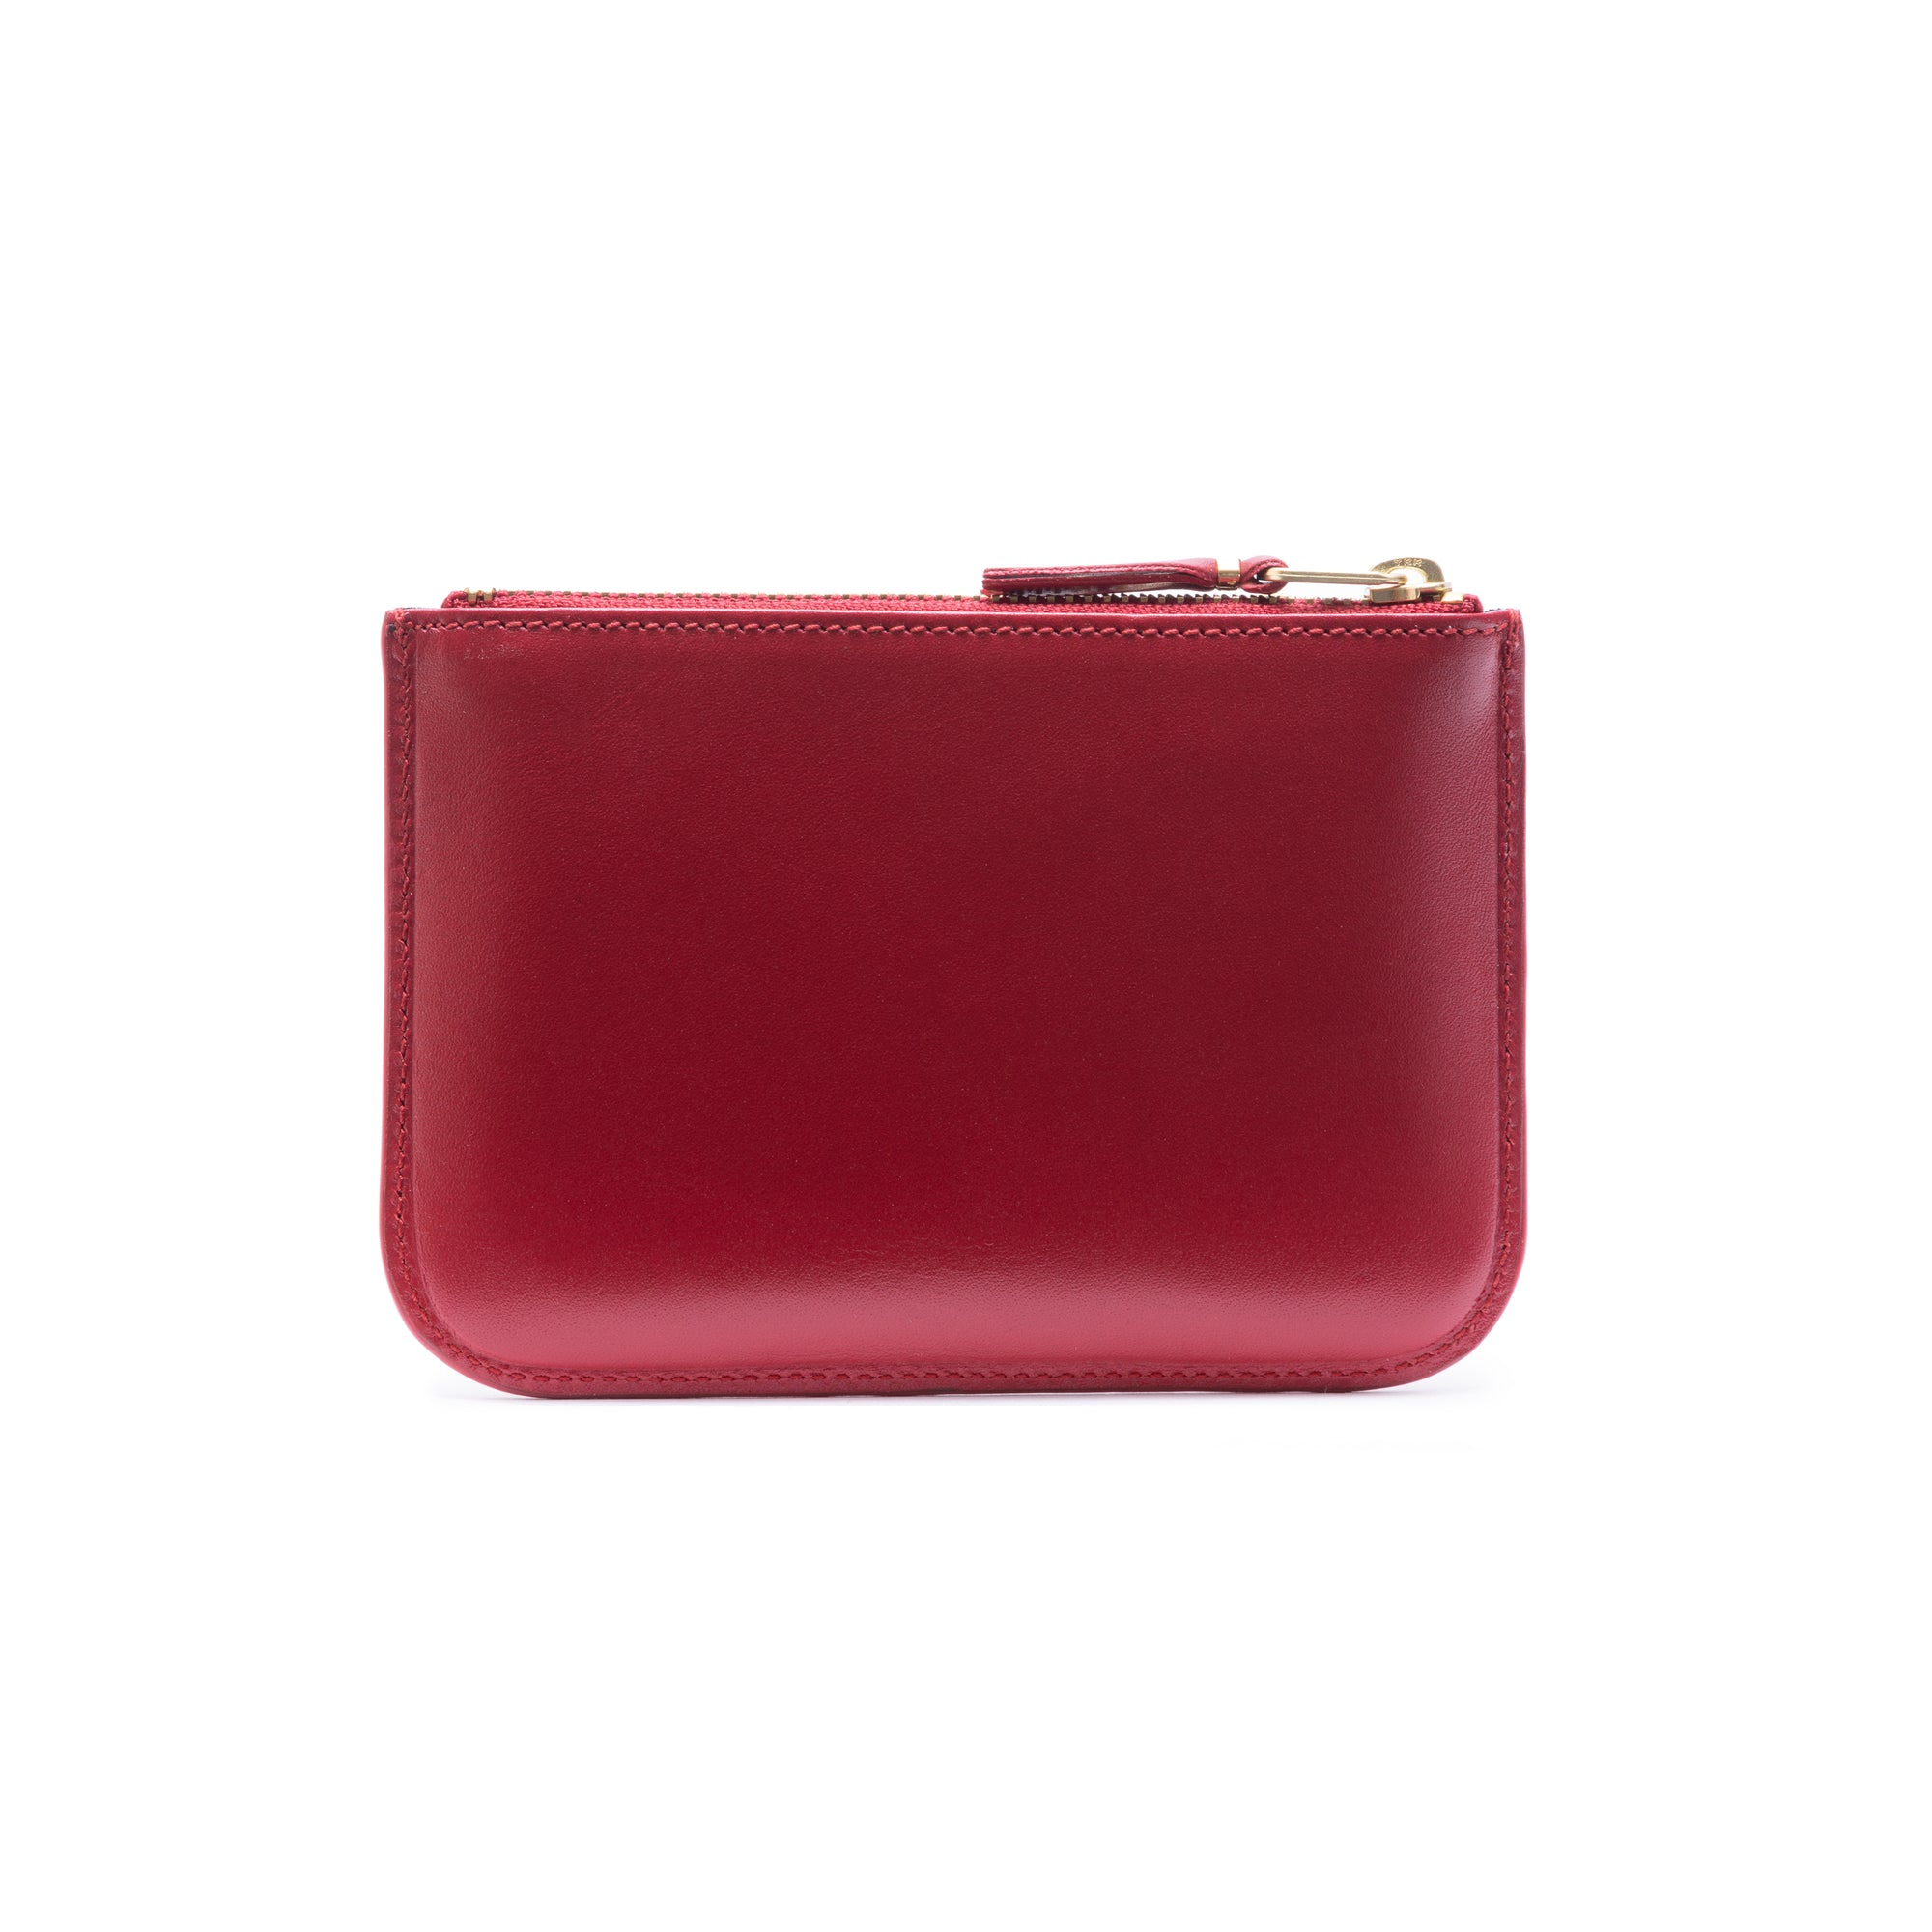 CDG WALLET - Classic Leather Outside Pocket Wallet - (8Z-X081 Red) view 2